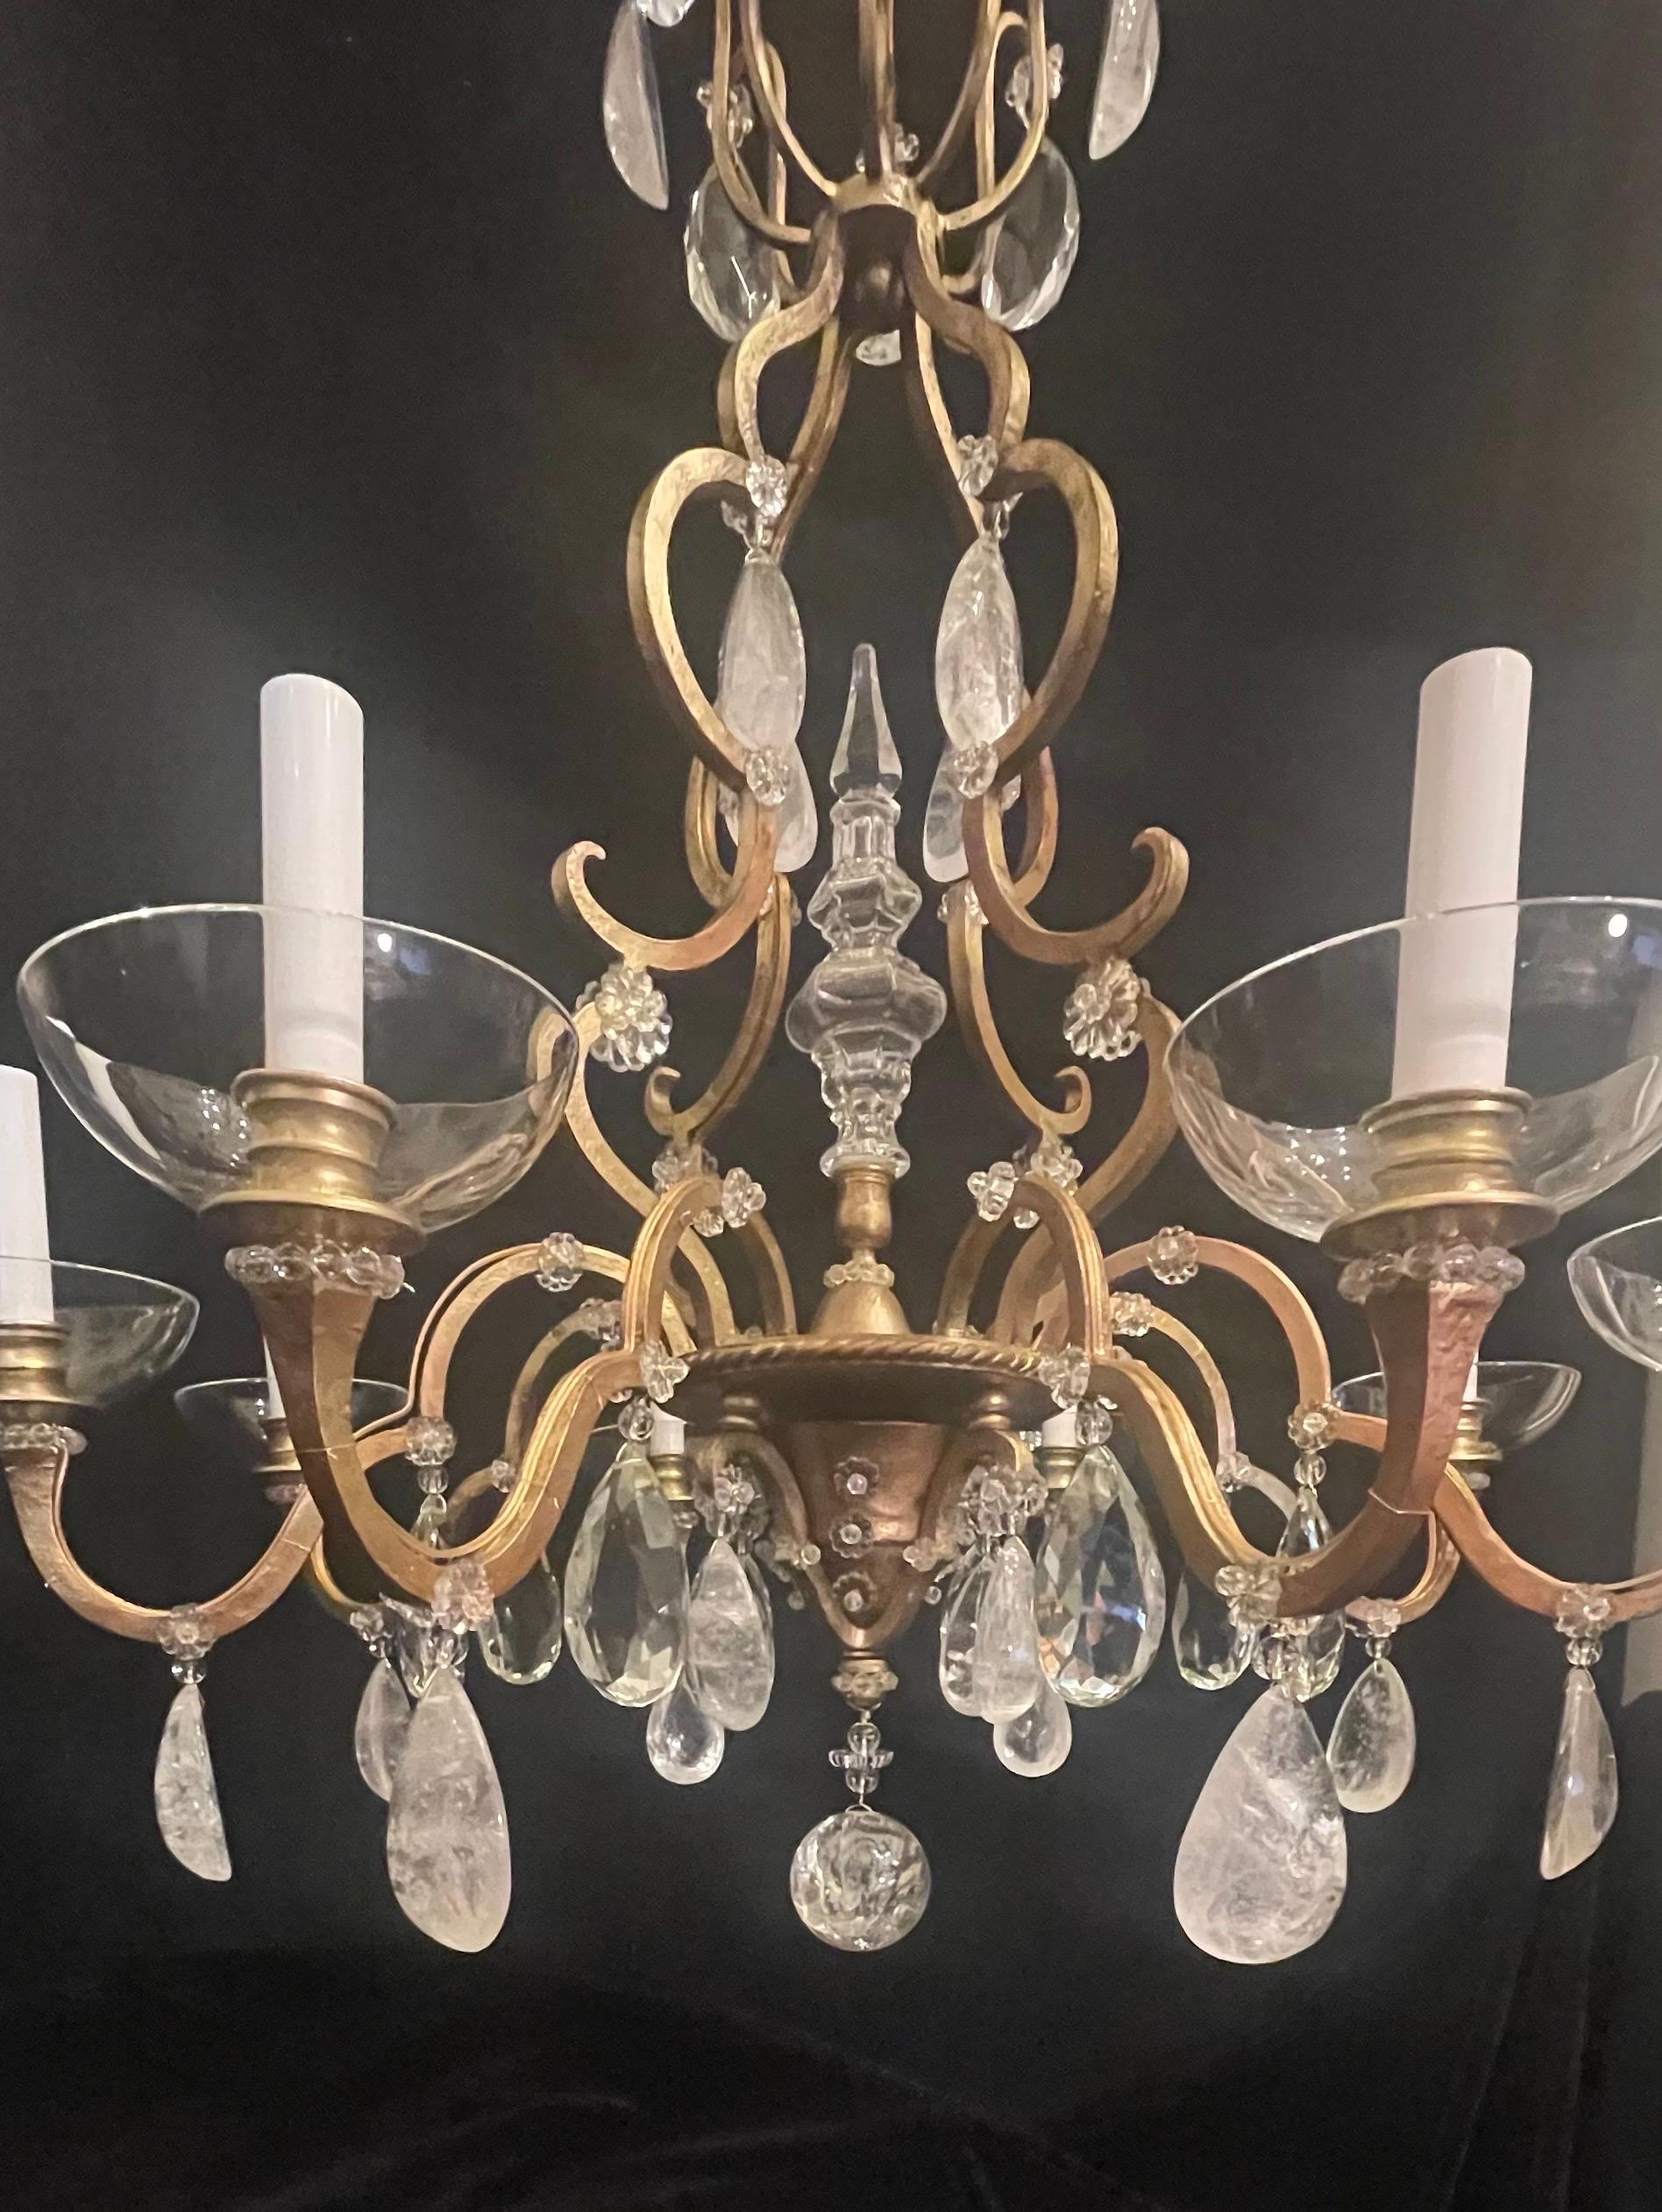 A Wonderful Louis XVI Bird cage Form Large Eight Candelabra Light Chandelier In The Manner Of Maison Baguès
Completely Rewired With New Sockets 